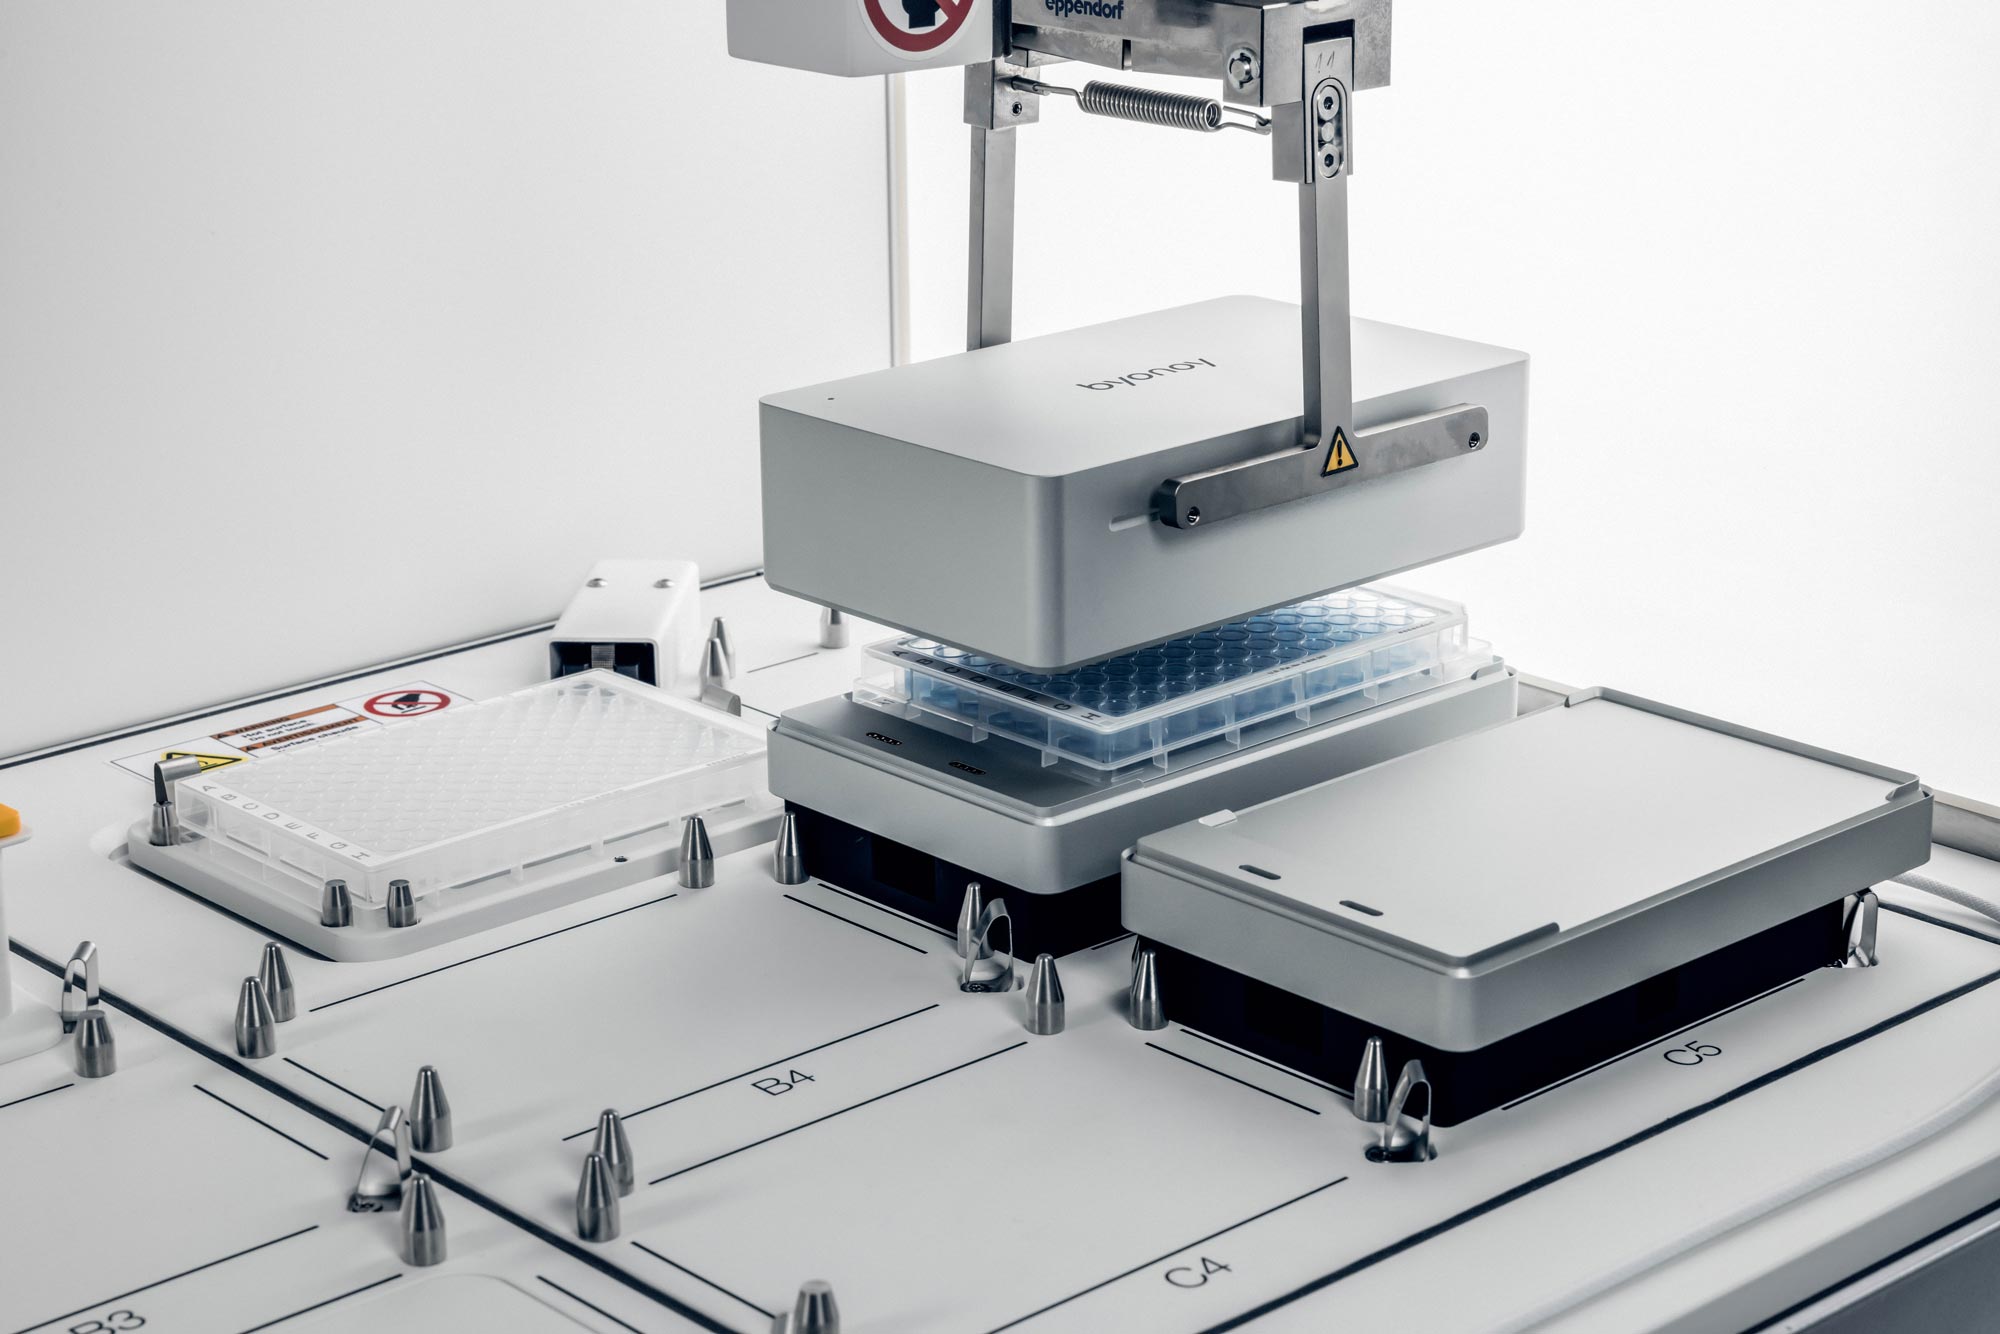  – Streamlined Protein Quantification: Enhancing Speed and Precision with Absorbance 96 Automate seamlessly integrated into Eppendorf epMotion®